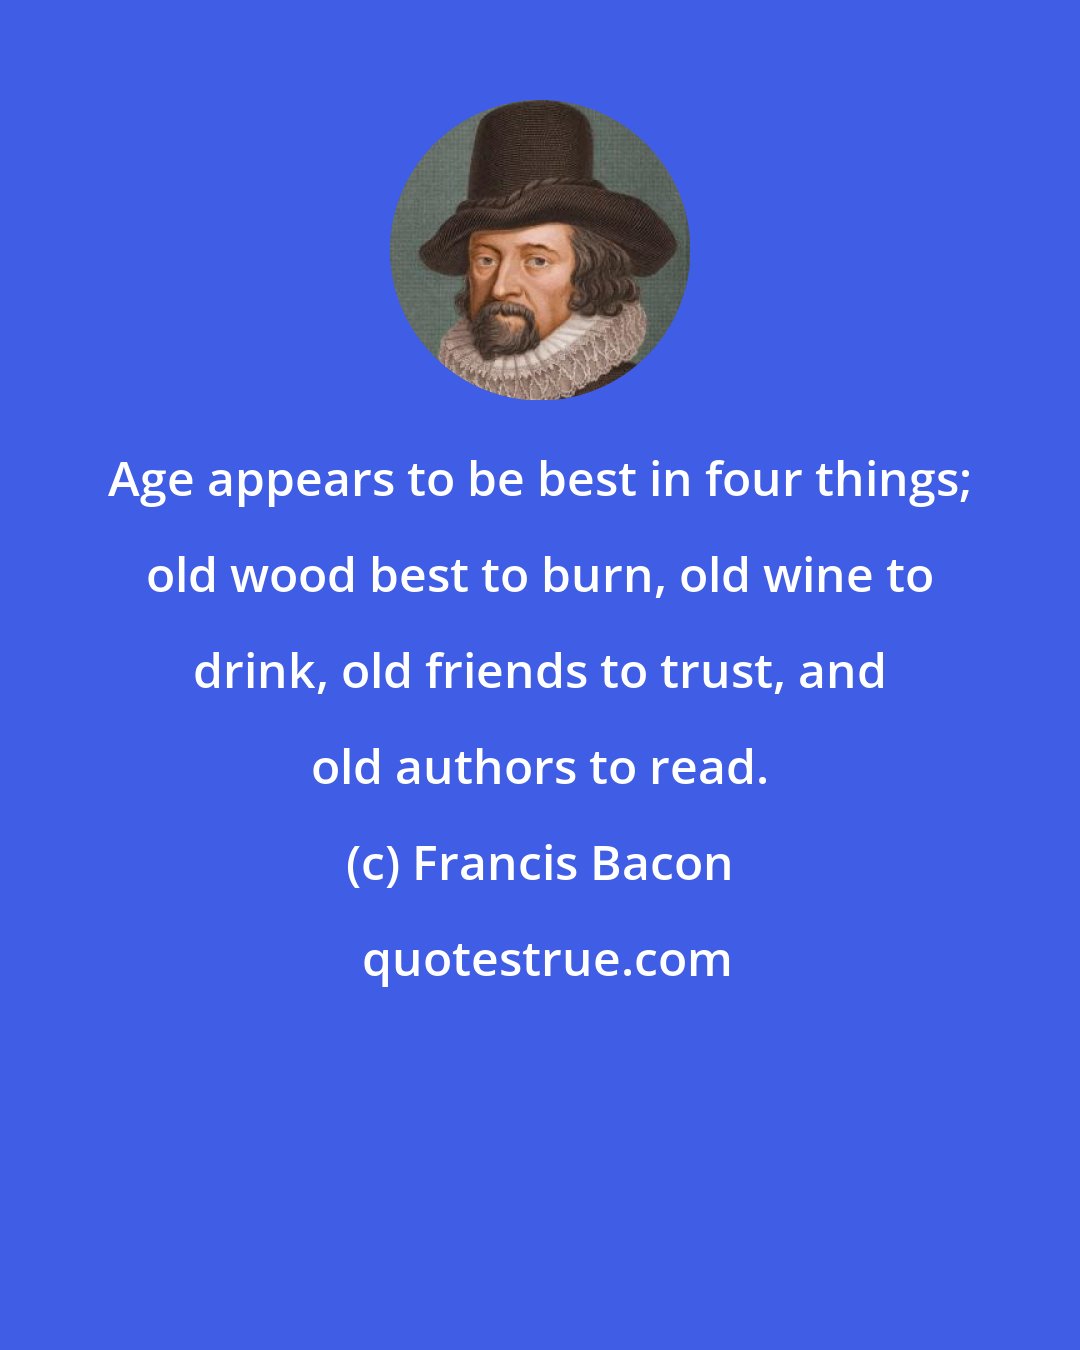 Francis Bacon: Age appears to be best in four things; old wood best to burn, old wine to drink, old friends to trust, and old authors to read.